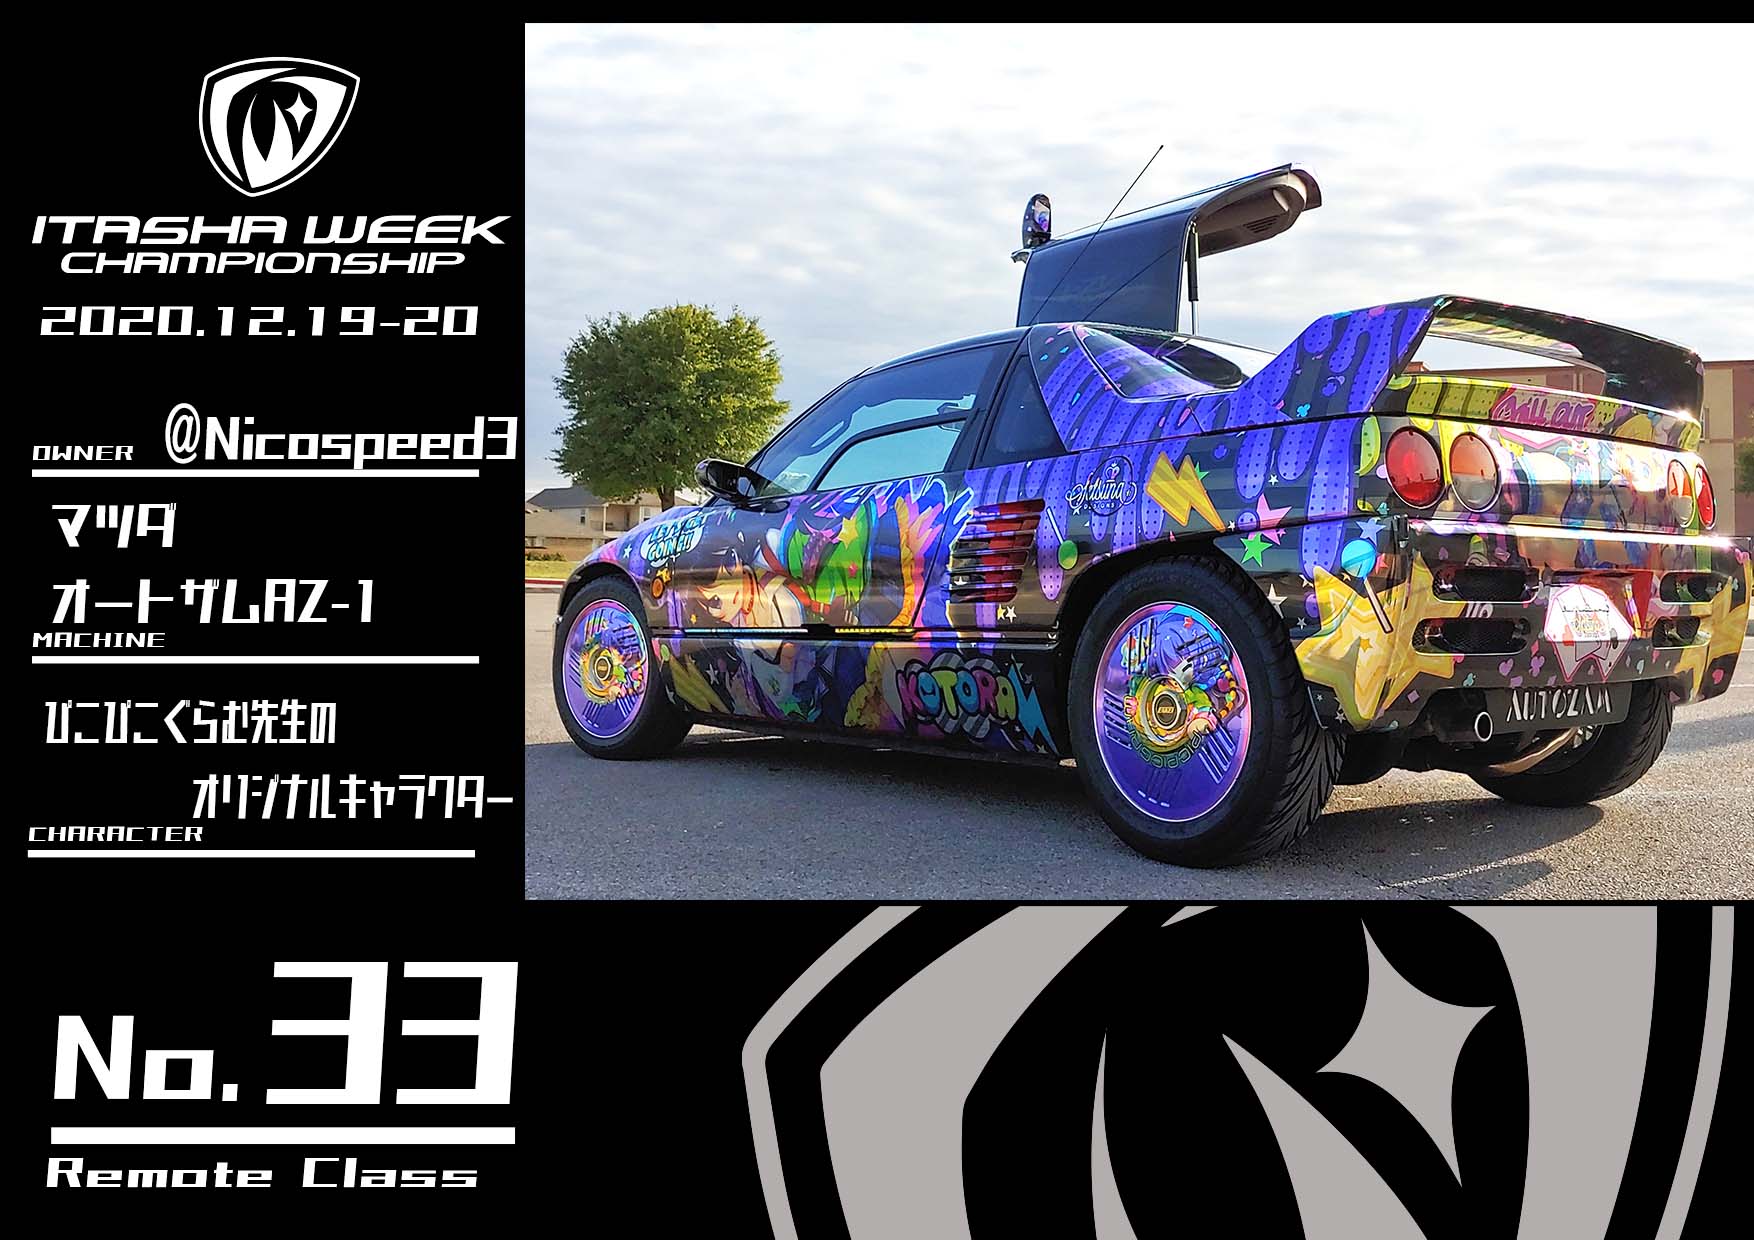 Itapara ーイタパラ Please Help Out Nicospeed3 For The Itasha Week Remote Competition By Liking Retweeting The Original Post Twitter